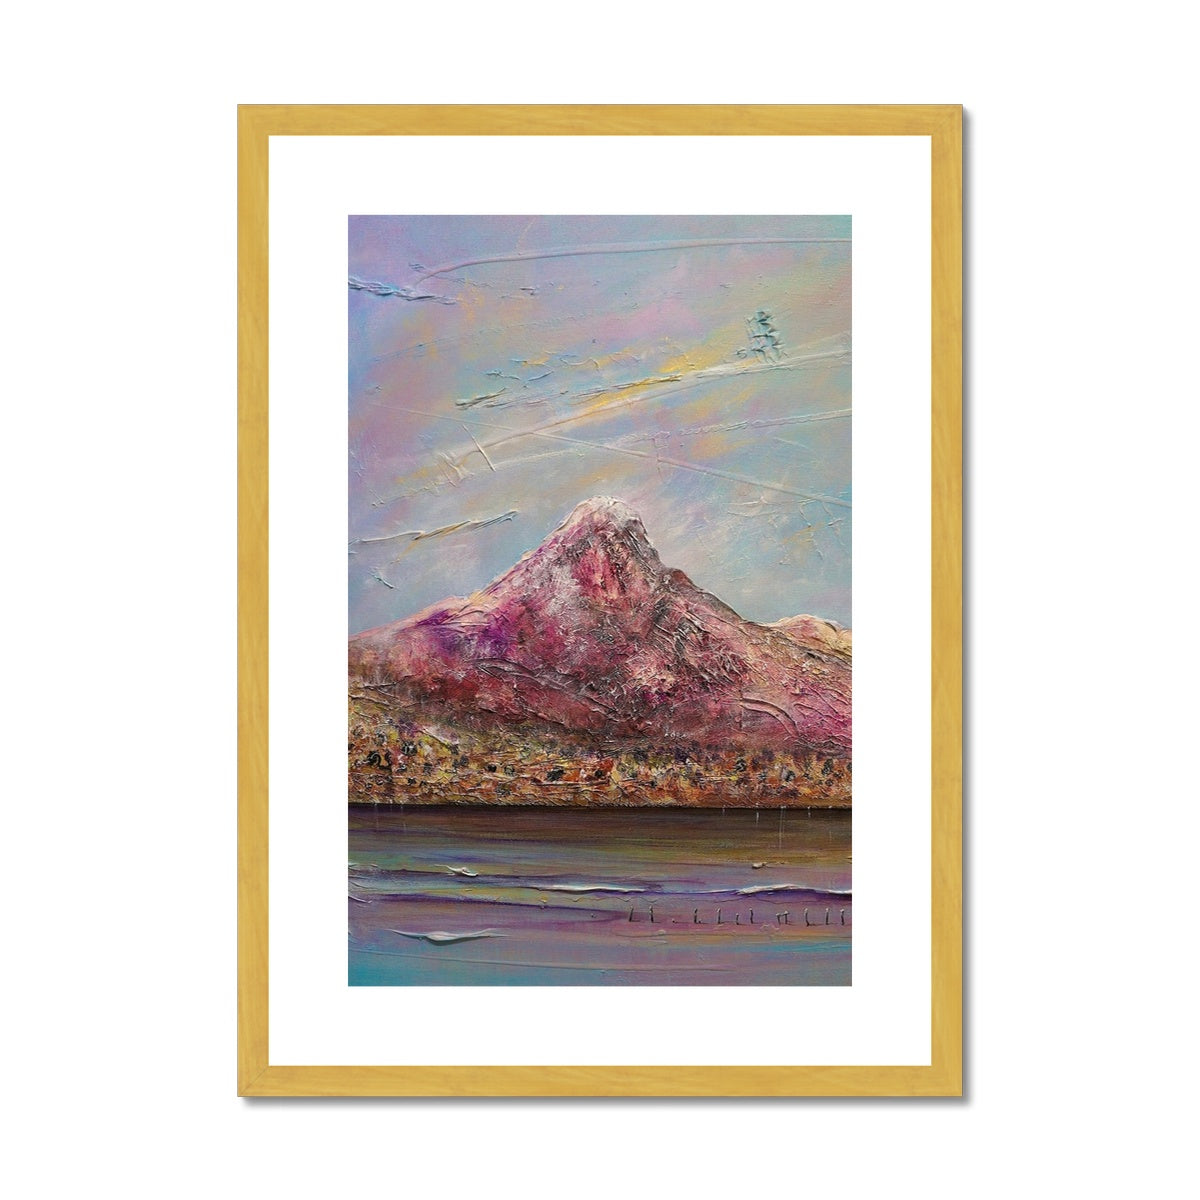 Ben Lomond Painting | Antique Framed & Mounted Prints From Scotland-Fine art-Scottish Lochs & Mountains Art Gallery-A2 Portrait-Gold Frame-Paintings, Prints, Homeware, Art Gifts From Scotland By Scottish Artist Kevin Hunter